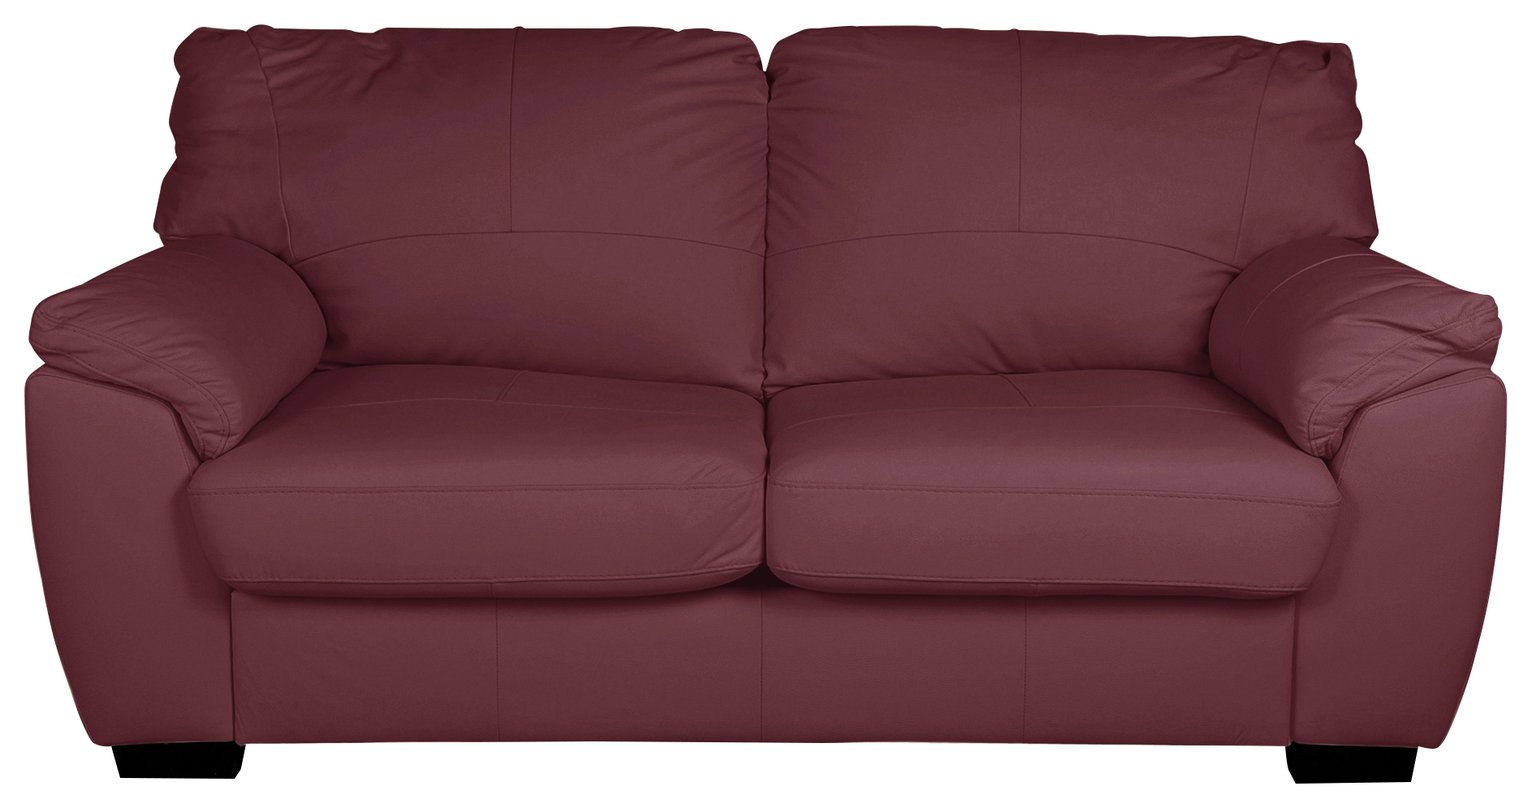 milano 2 seater leather sofa bed